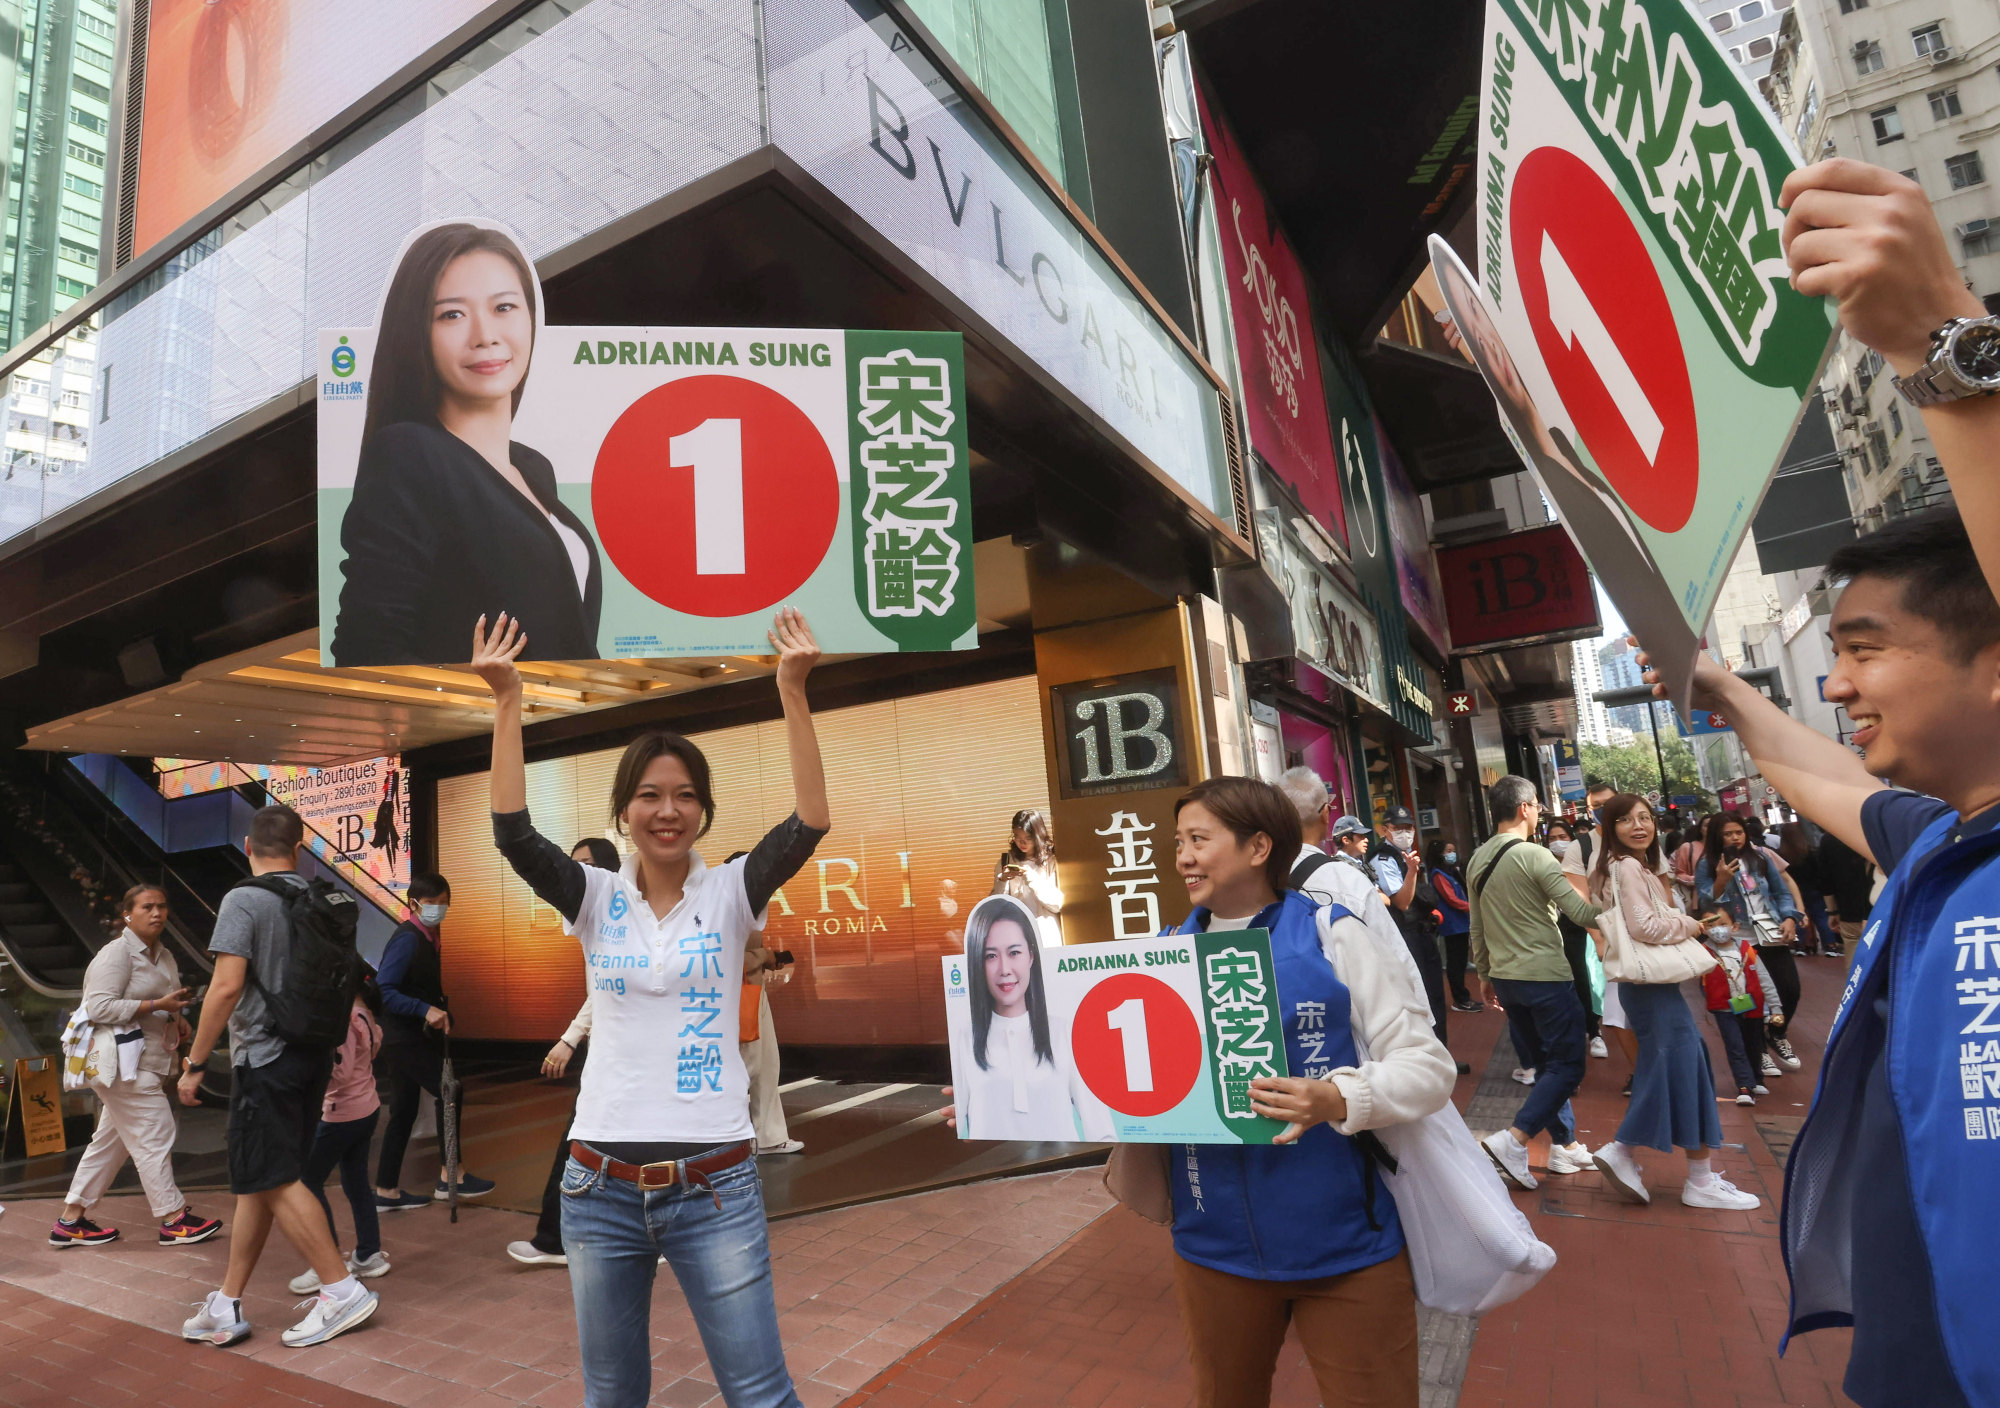 As it happened: Hong Kong district council election ends after